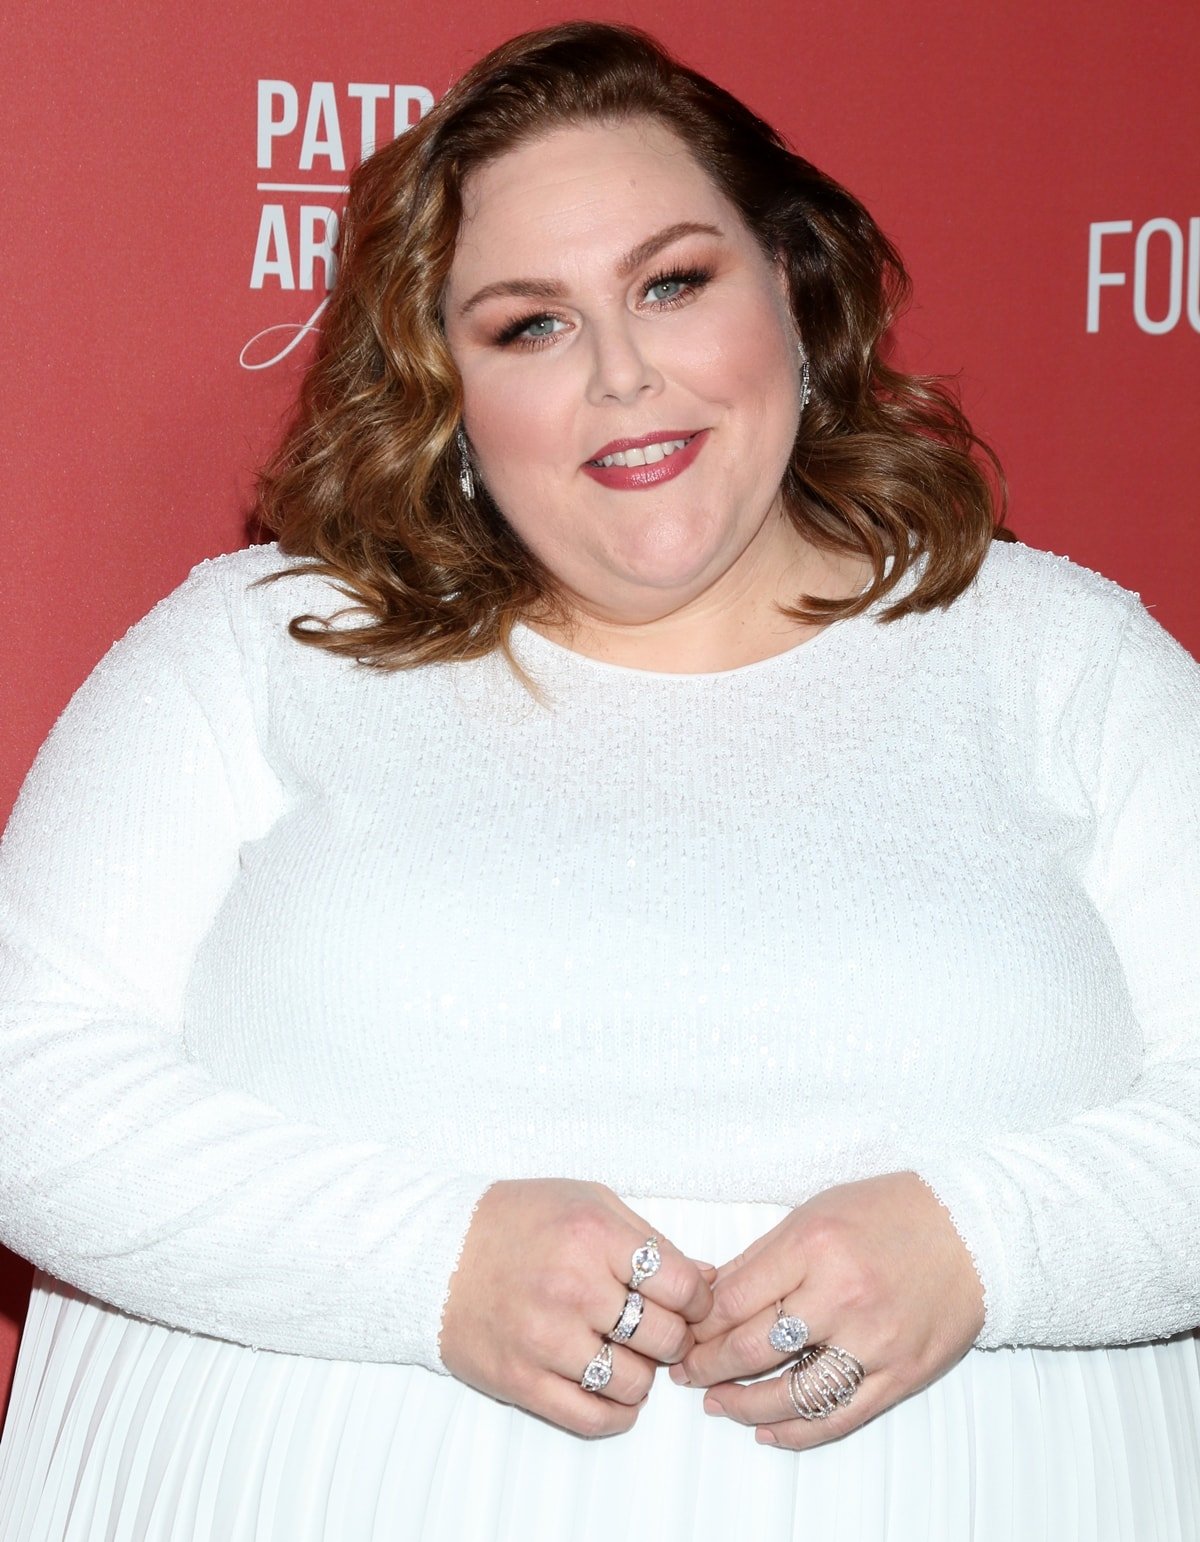 Chrissy Metz has always been open about her weight loss journey and body fluctuations